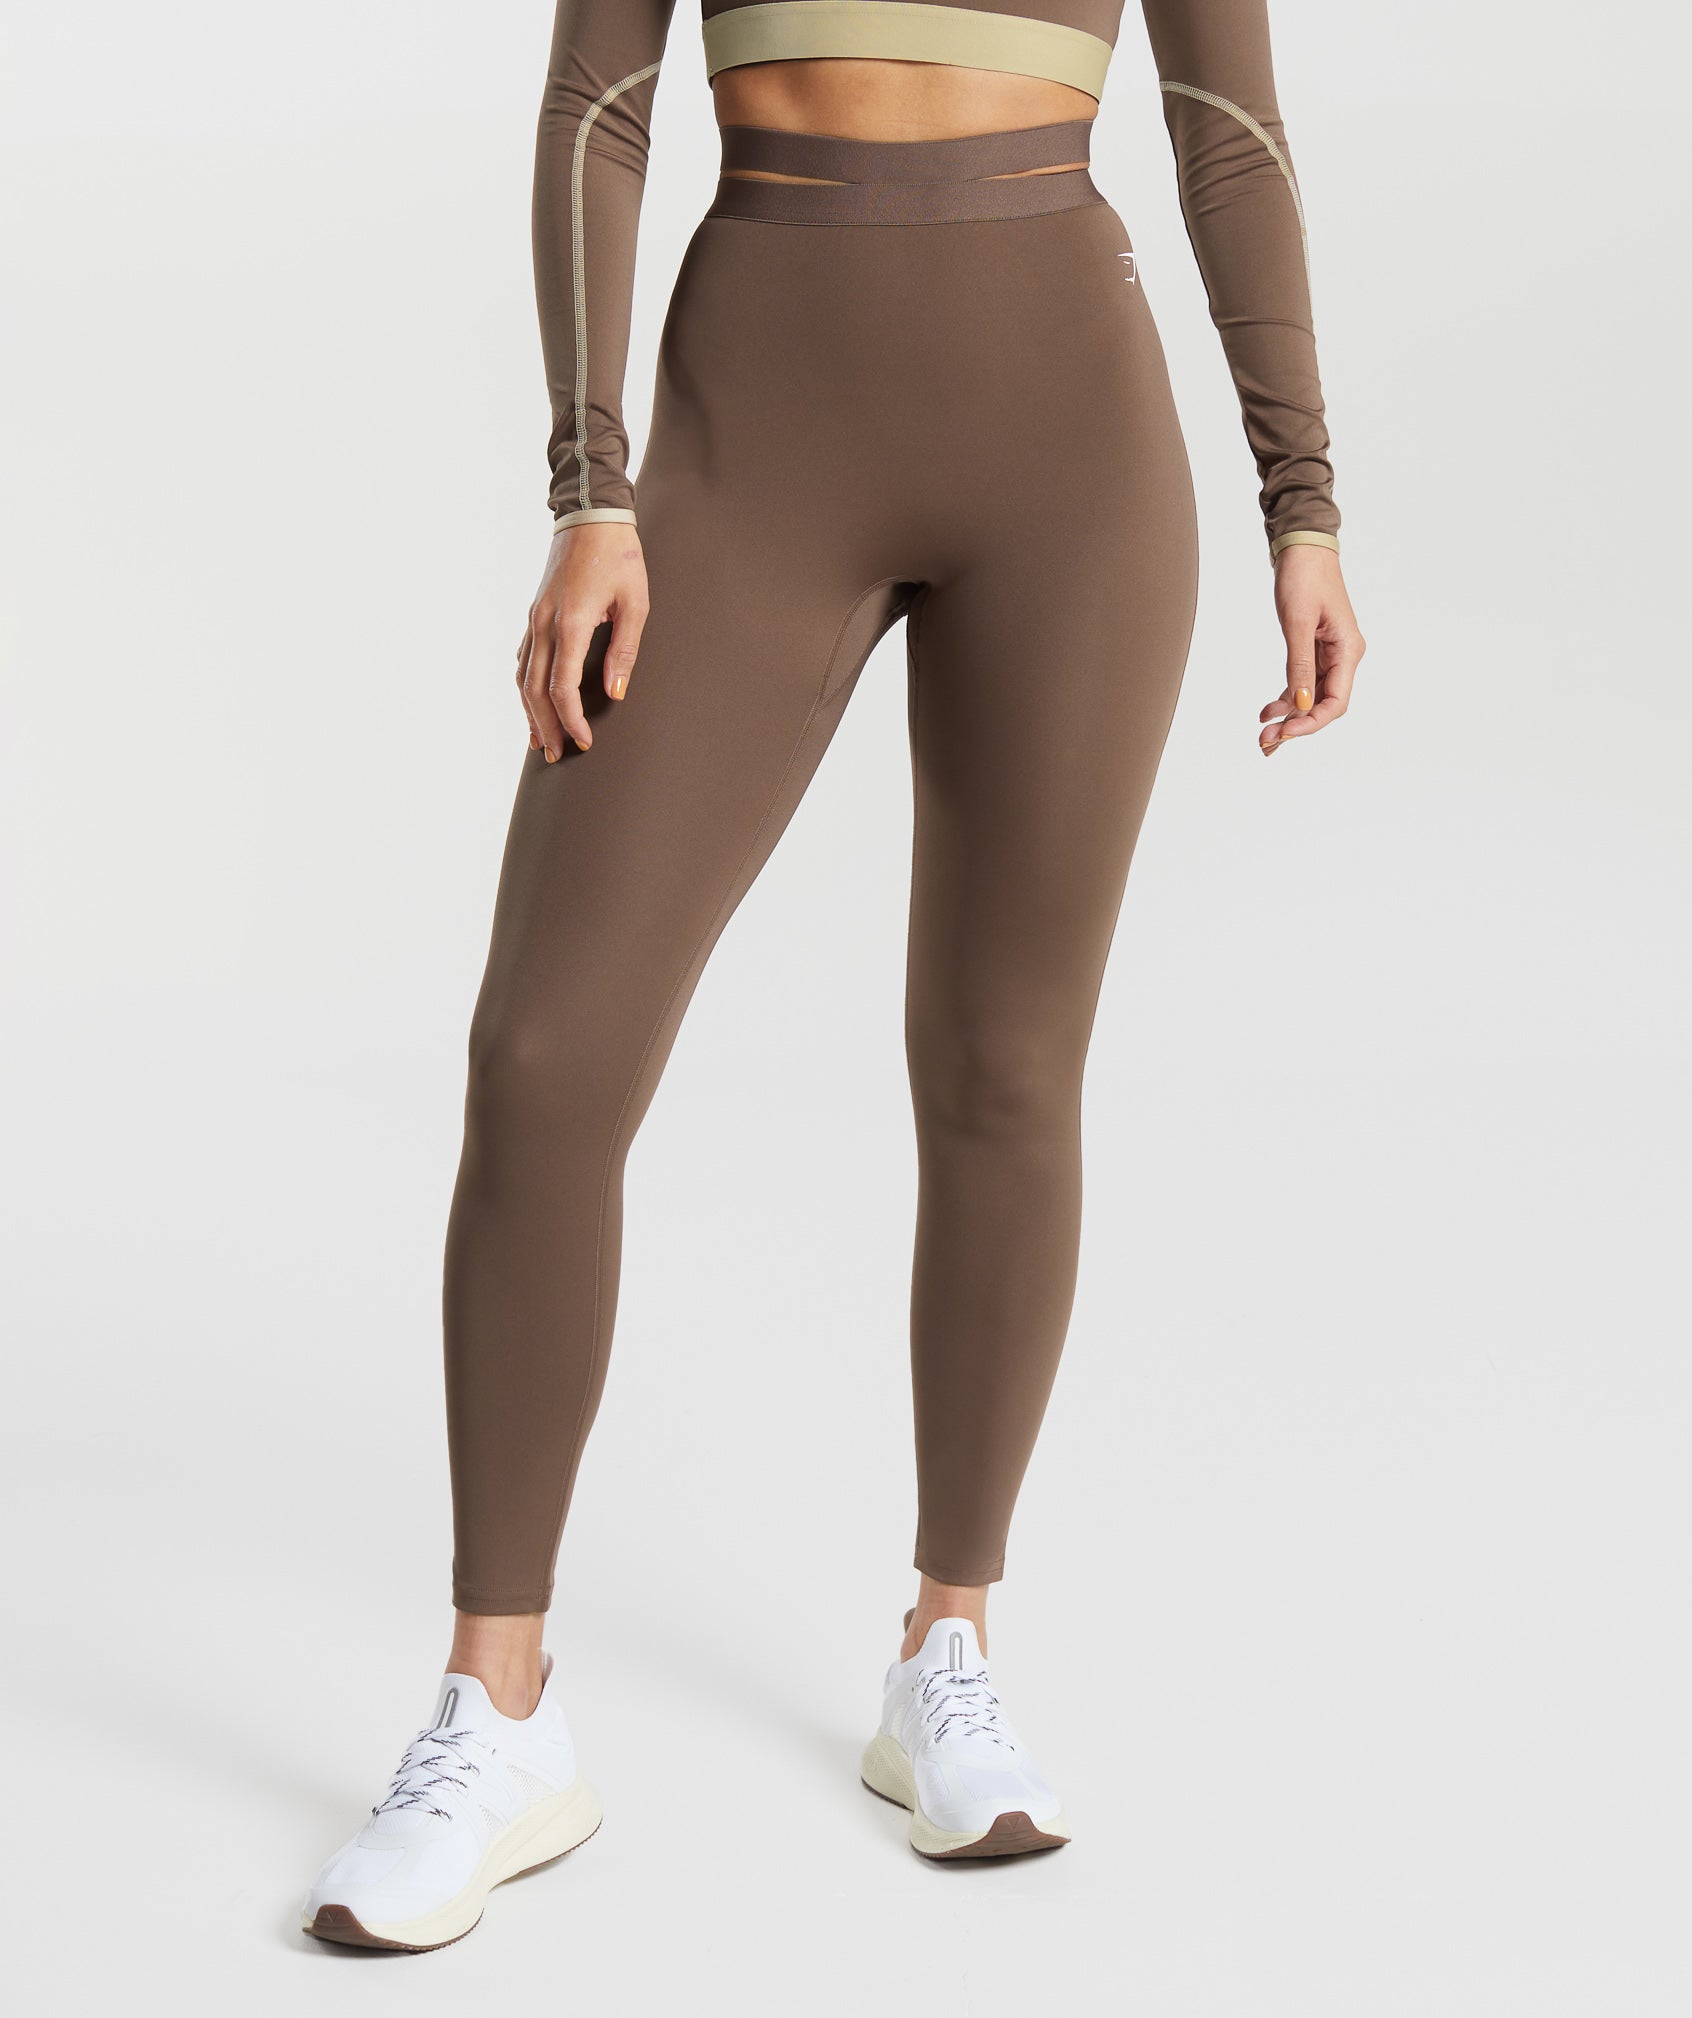 Strappy Waistband Leggings in Soft Brown is out of stock